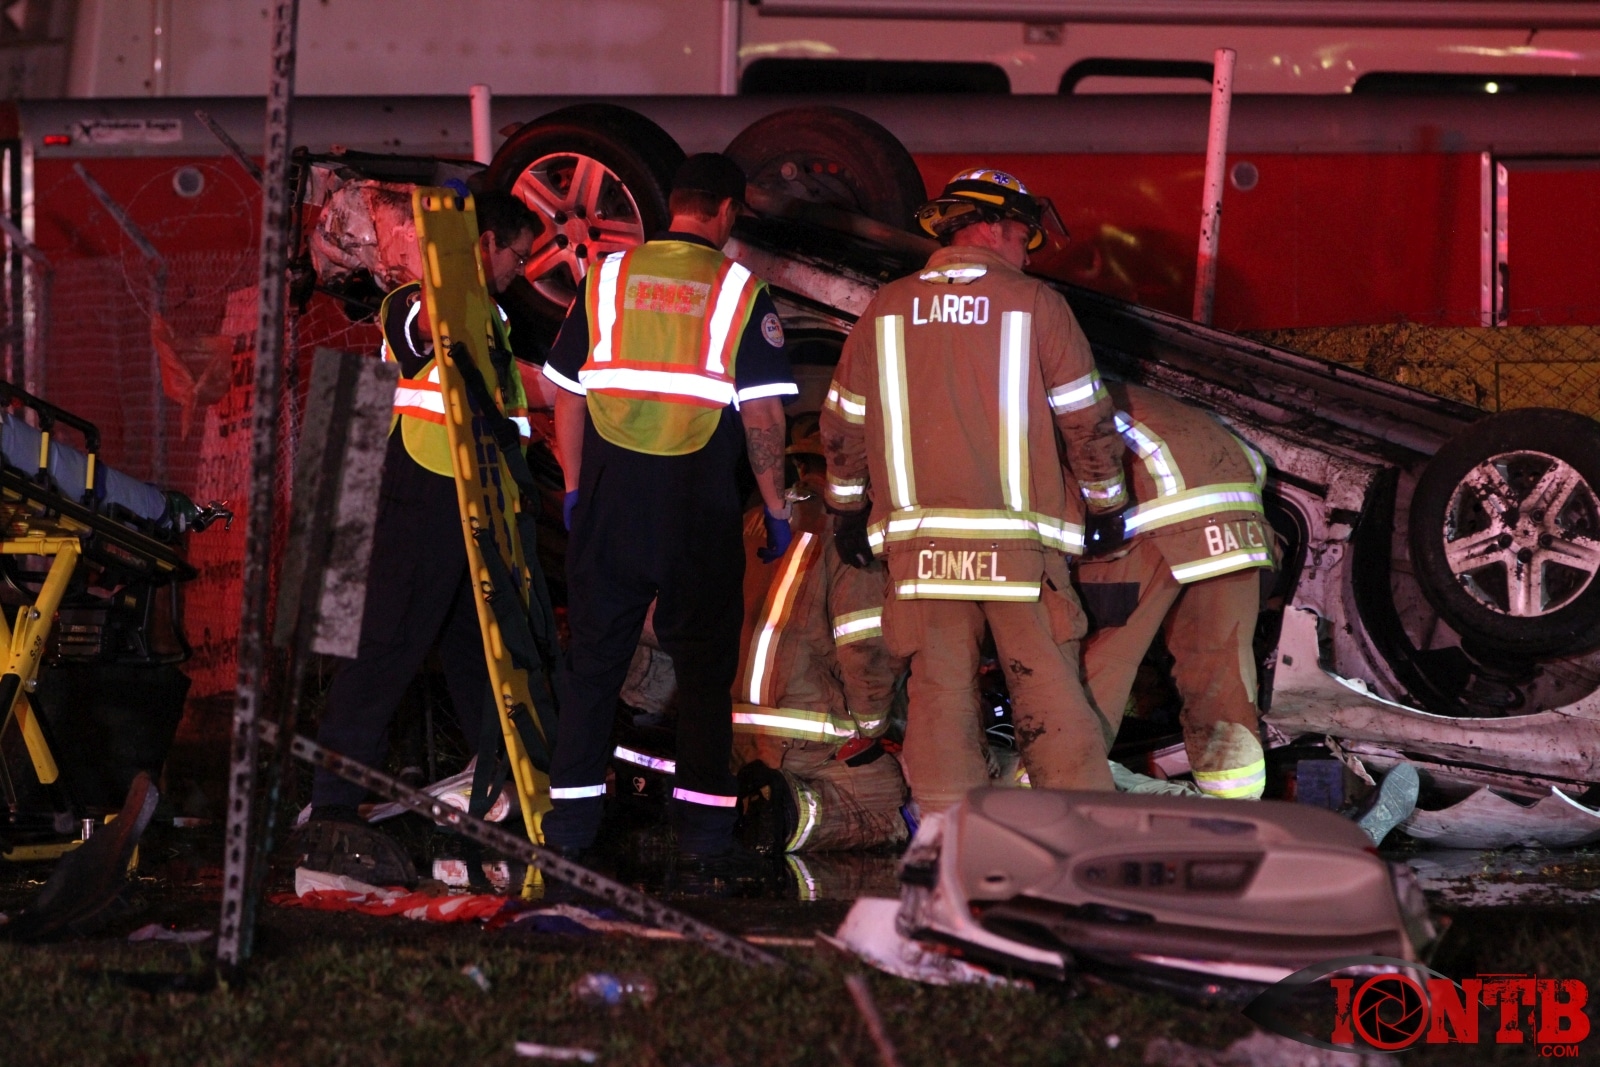 Fatality Involving an Overturned Vehicle on Starkey Road in Largo